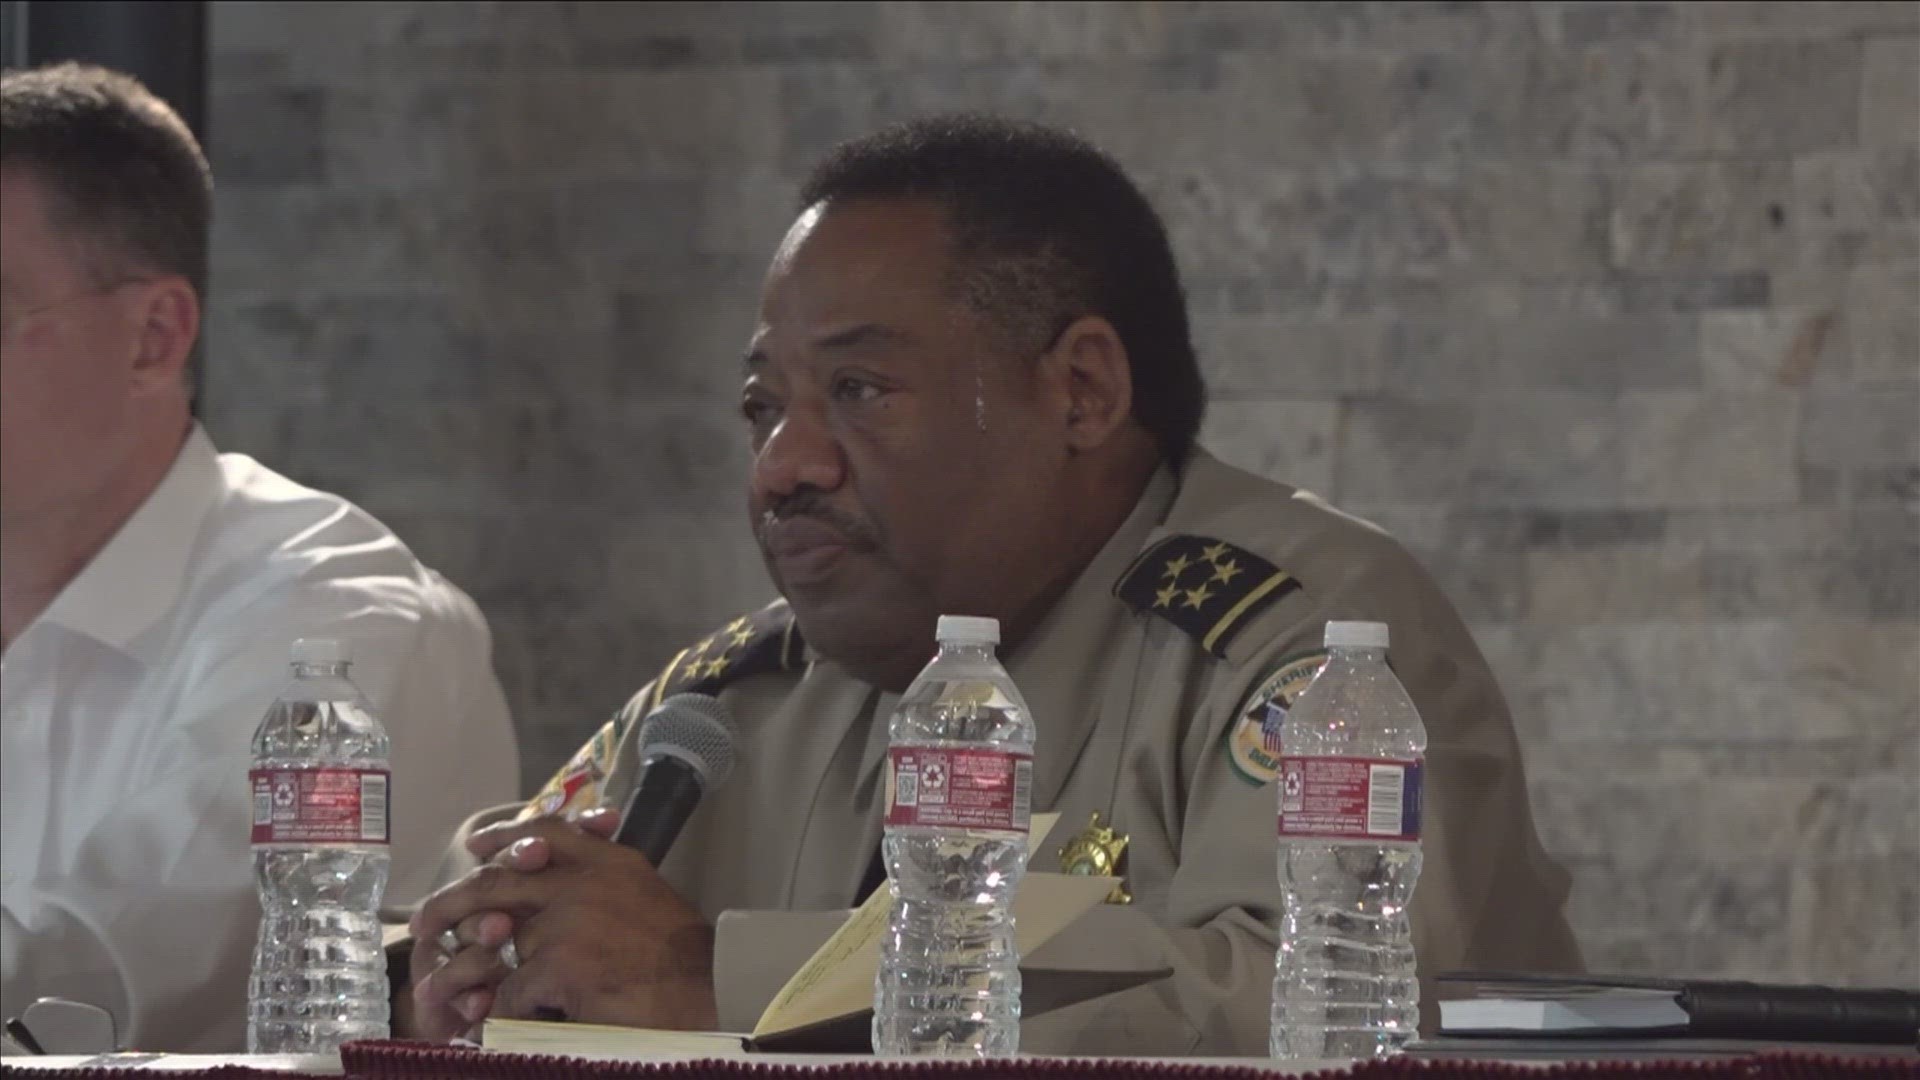 Shelby County Sheriff Floyd Bonner and Shelby County Commissioner Erika Sugarmon spoke with community members about problems with